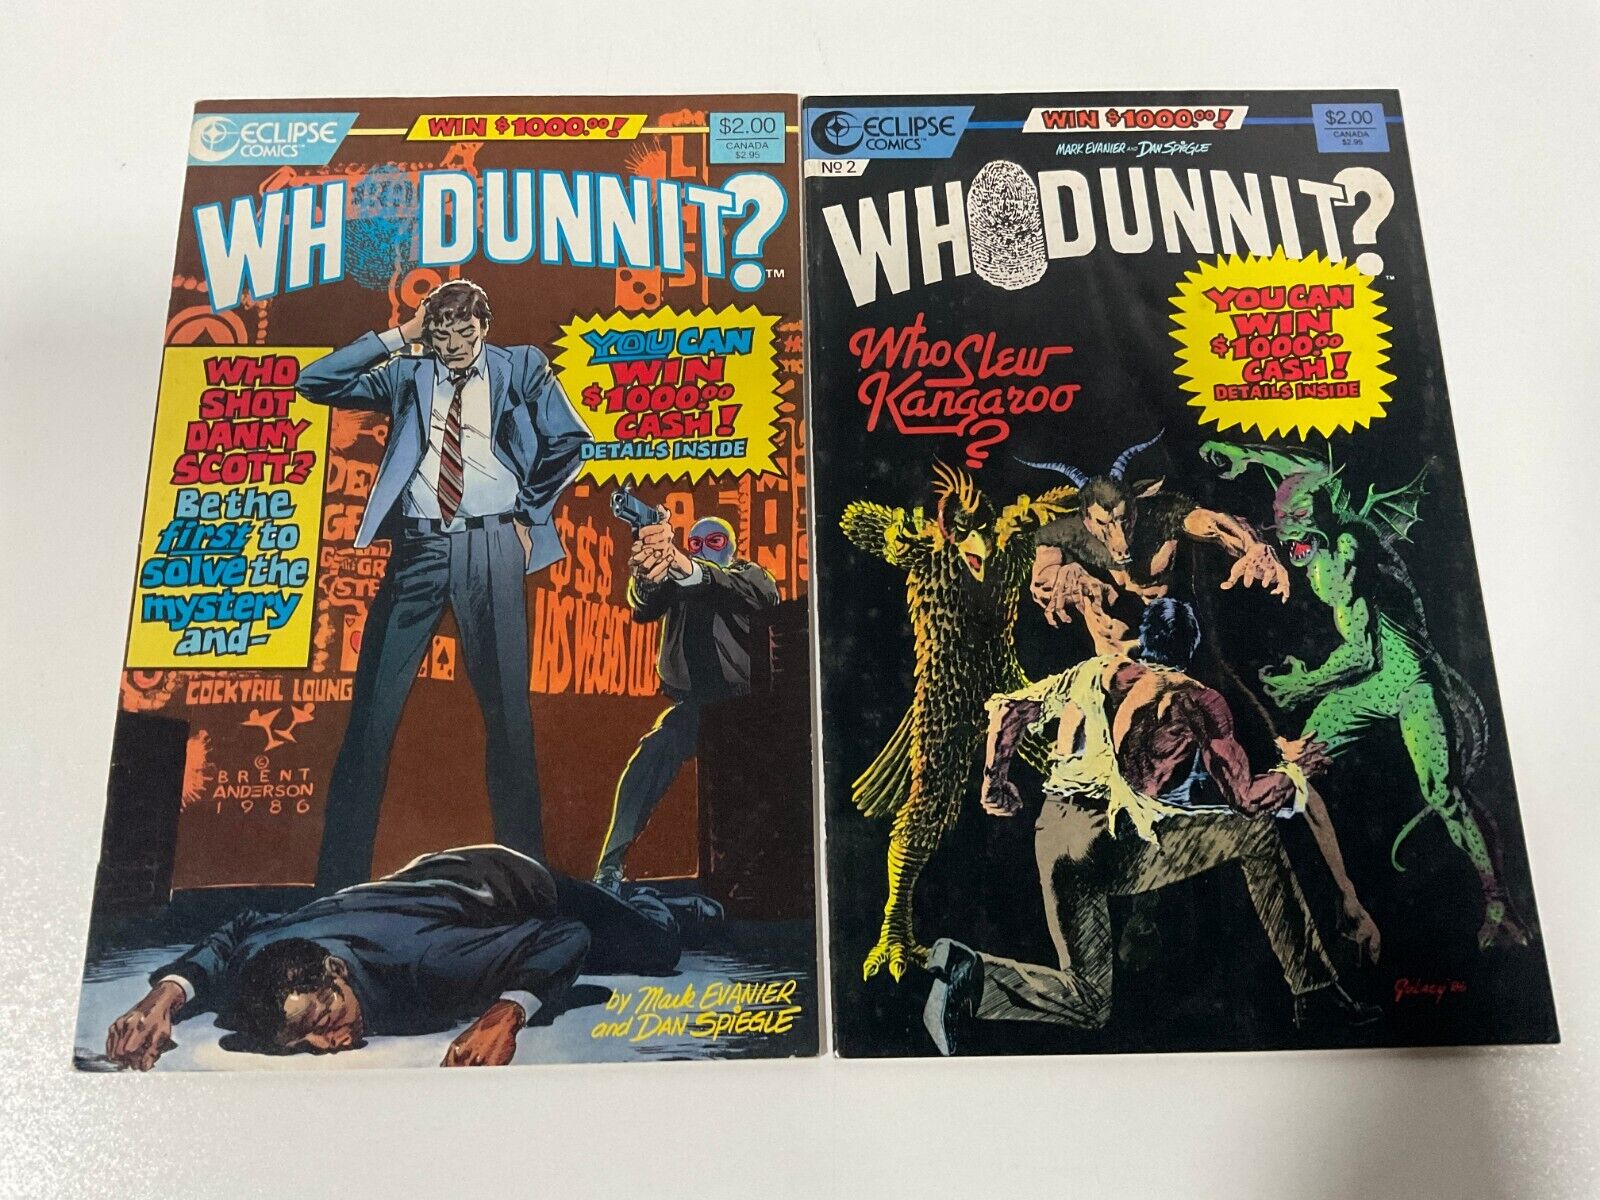 WHO DUNNIT #1-2 (ECLIPSE COMICS/1986/0124108) FULL SET - SOLVE THE MYSTERY 